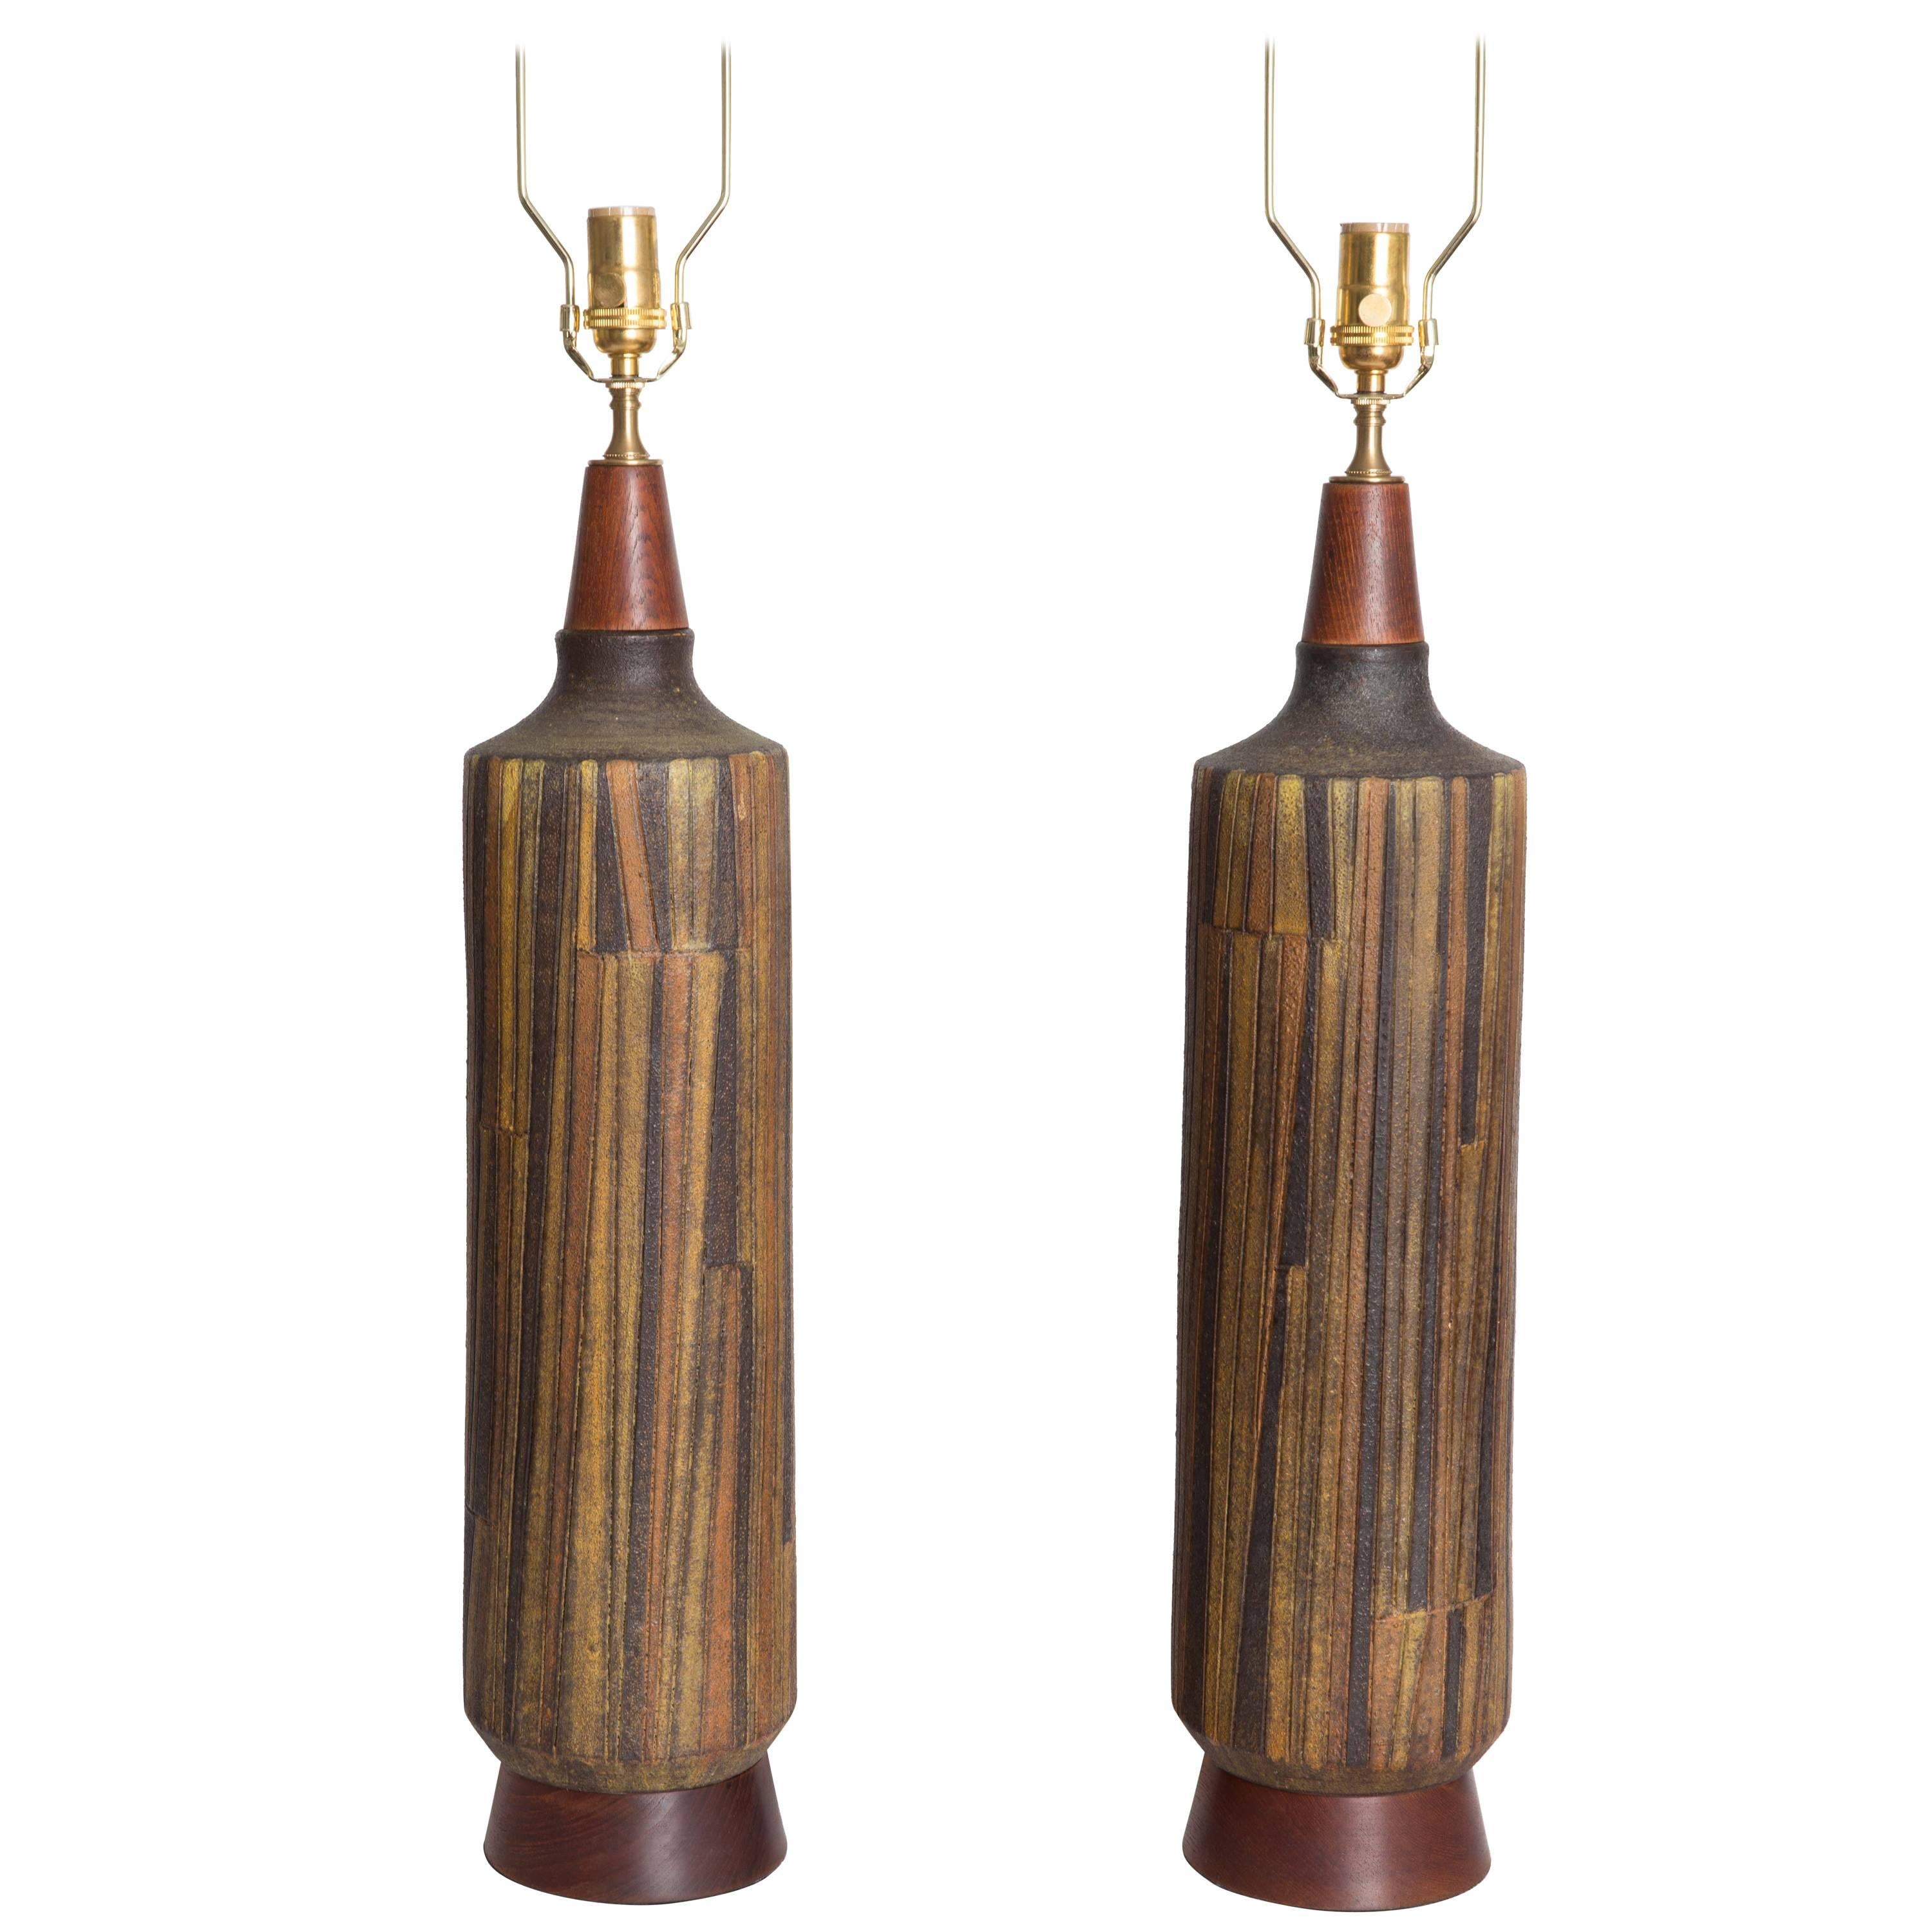 Pair of Columnar Multicolored Ceramic and Wood Lamps by Raymor